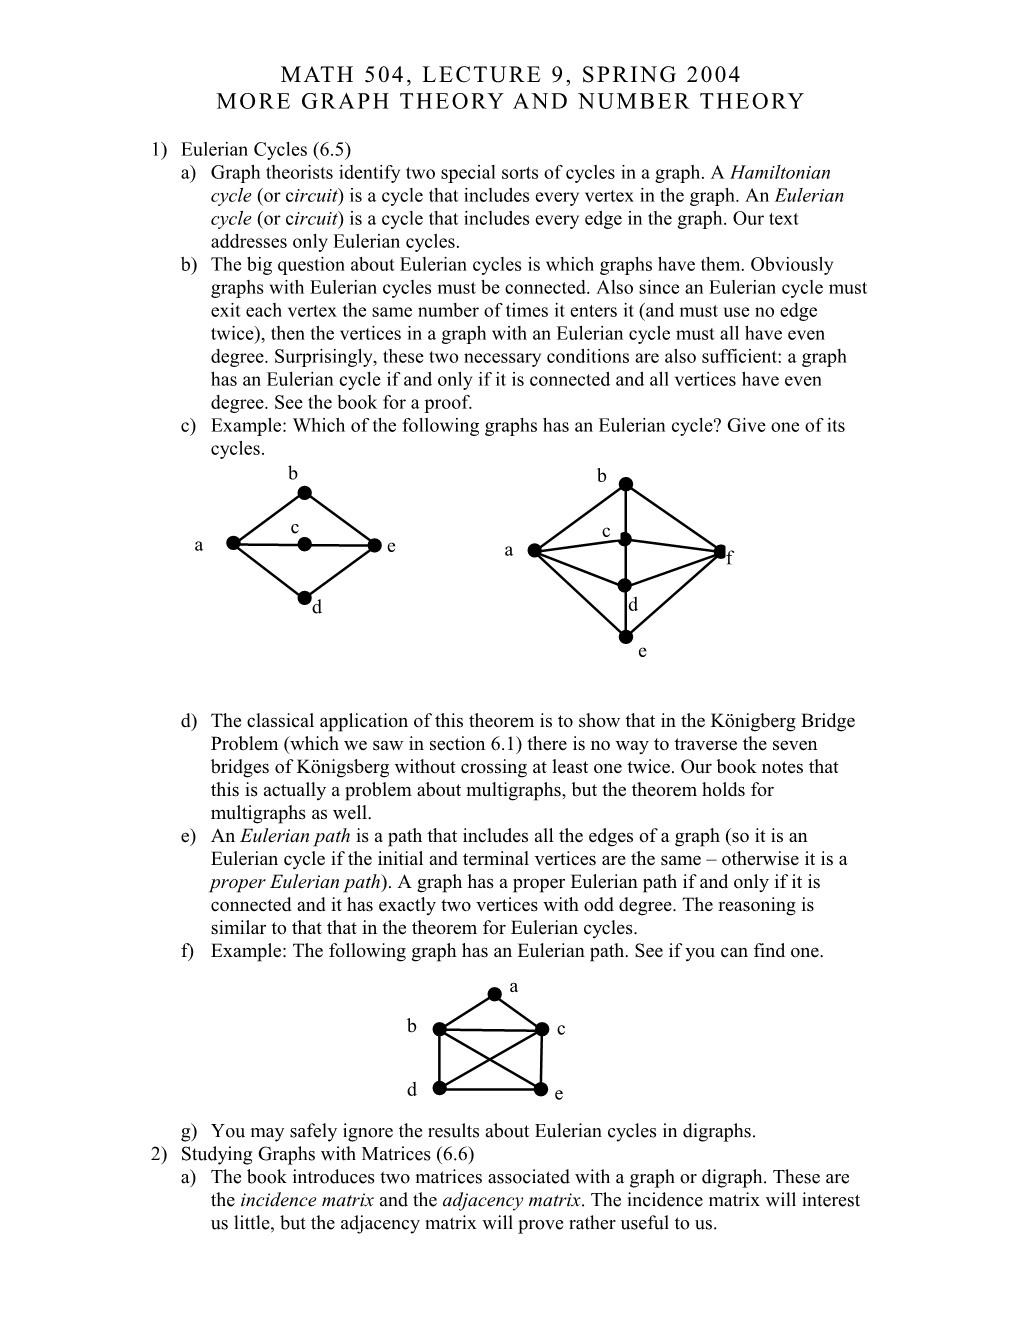 More Graph Theory and Number Theory